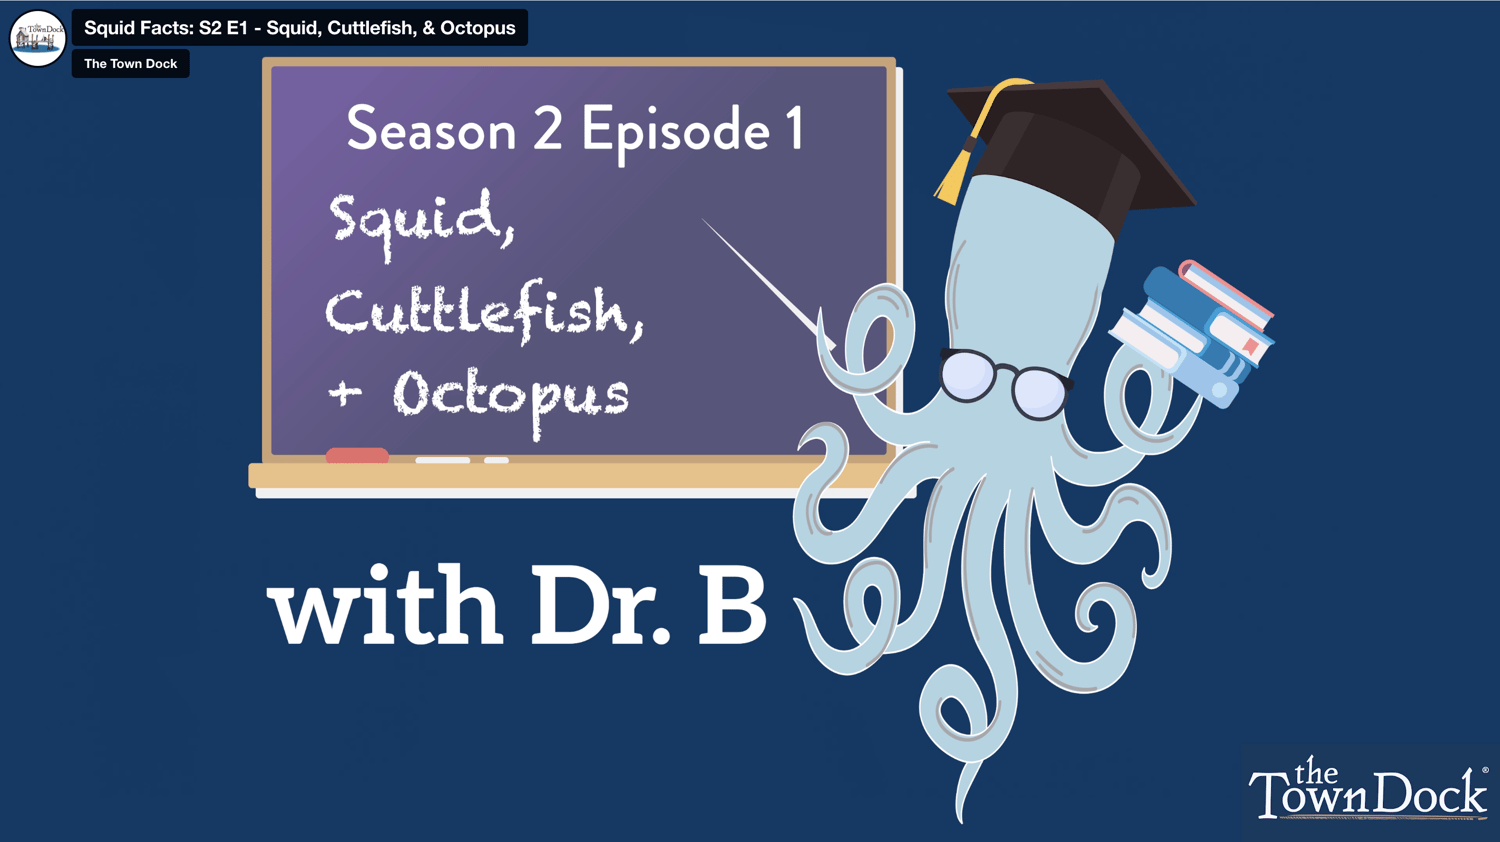 S2 E1: Squid, Cuttlefish, and Octopus